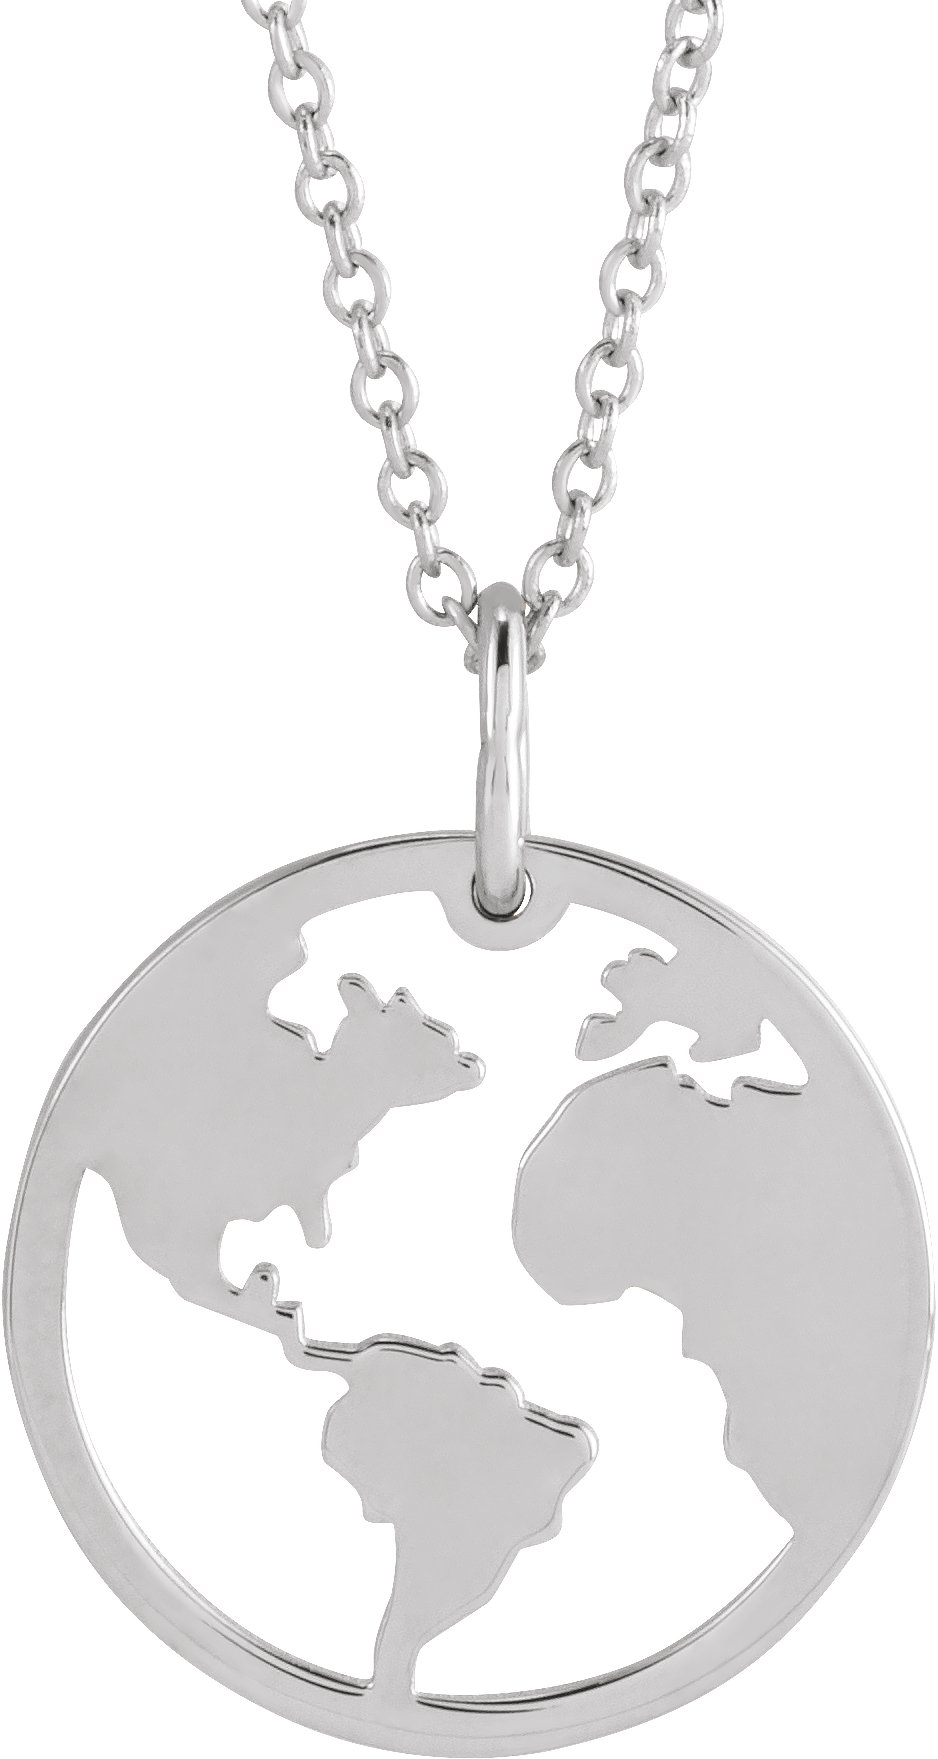 14K White 19.2x15 mm Earth Cutout 16-18" Necklace